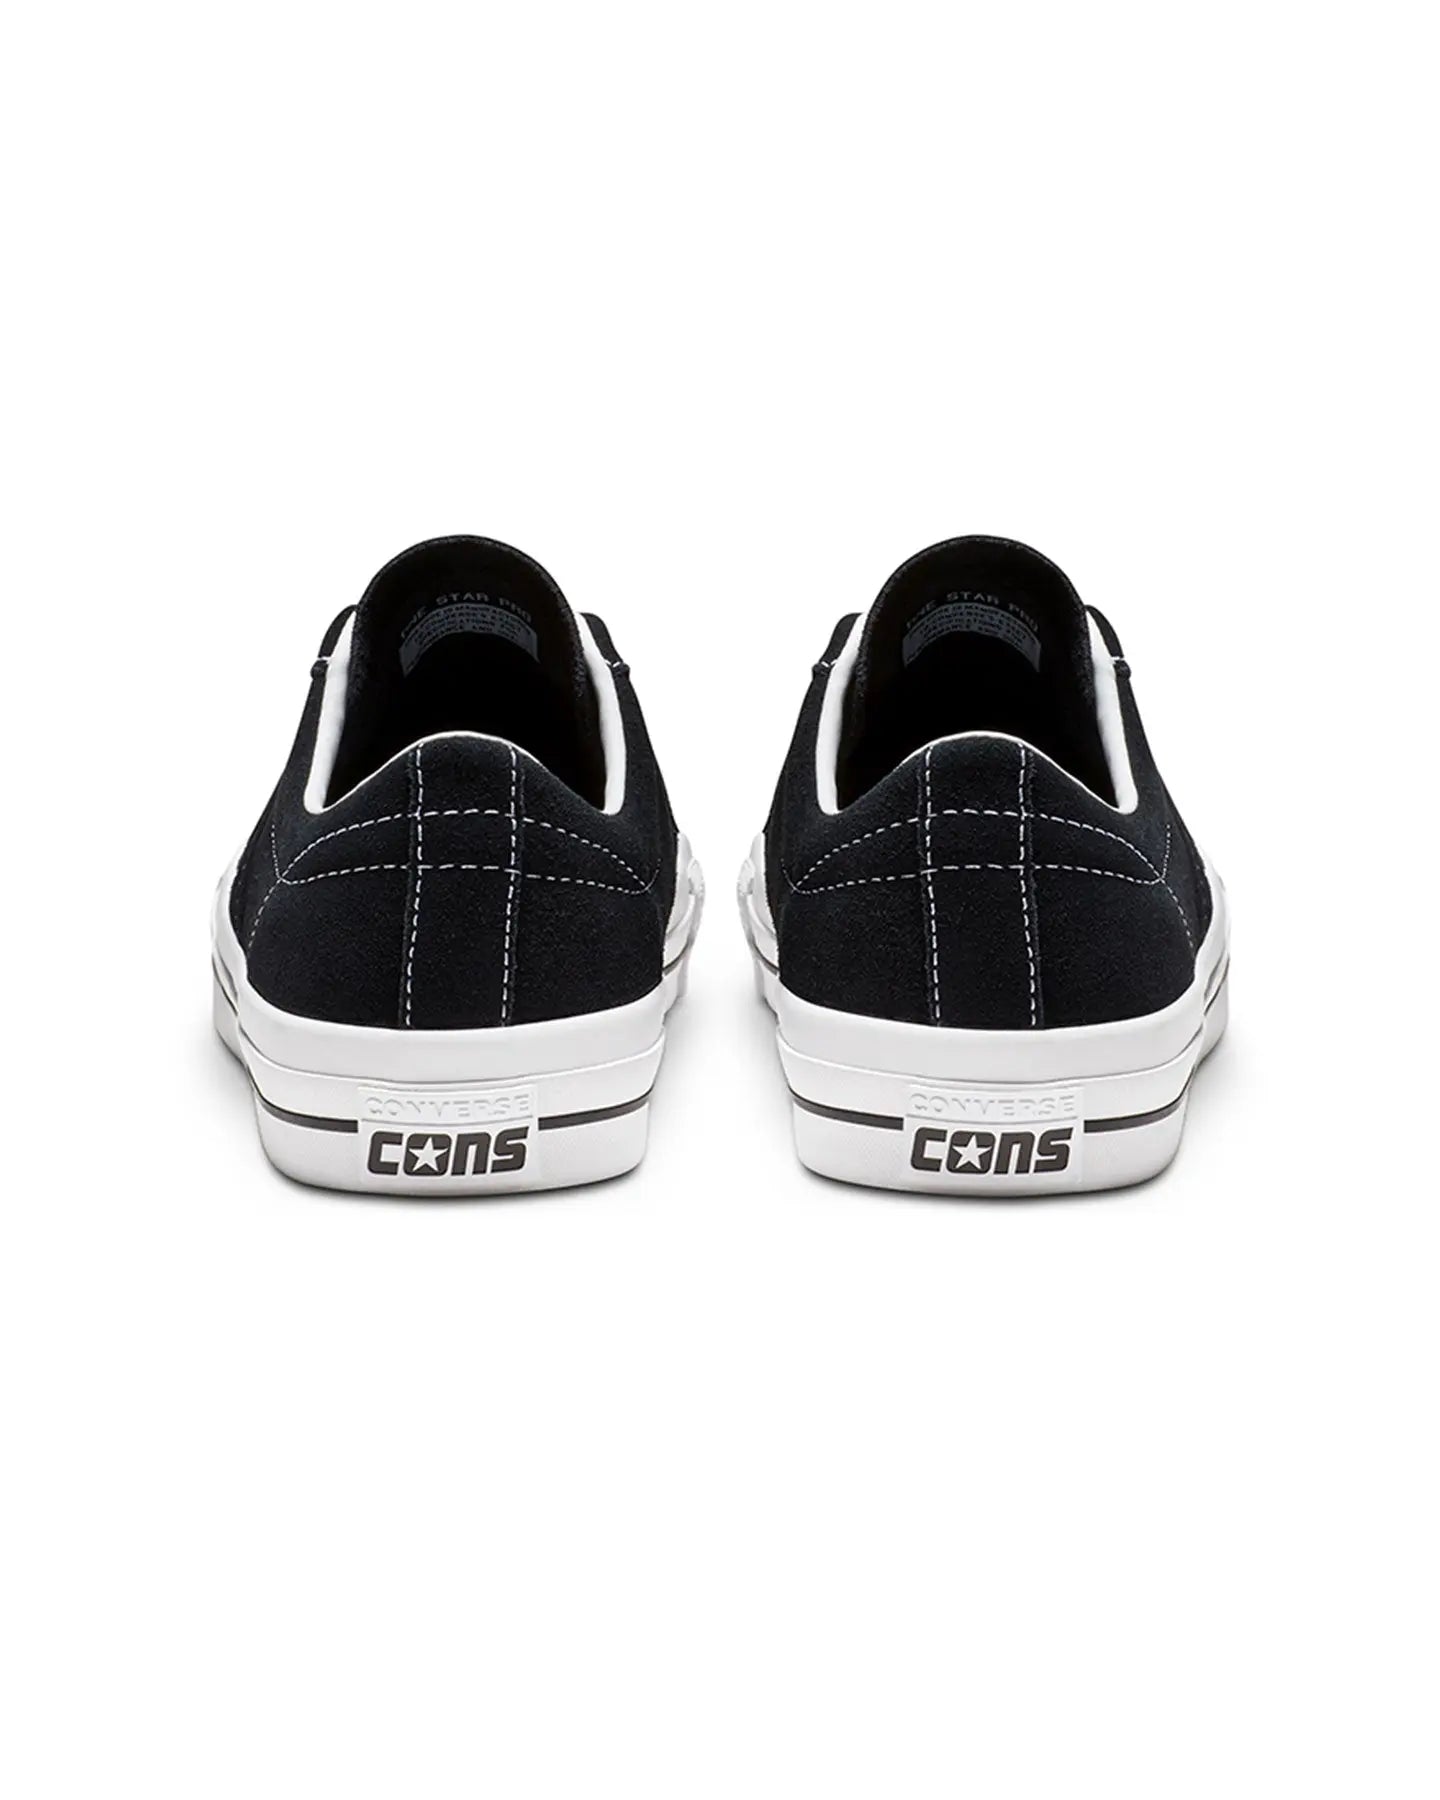 Cons One Star Pro - Black / White Footwear